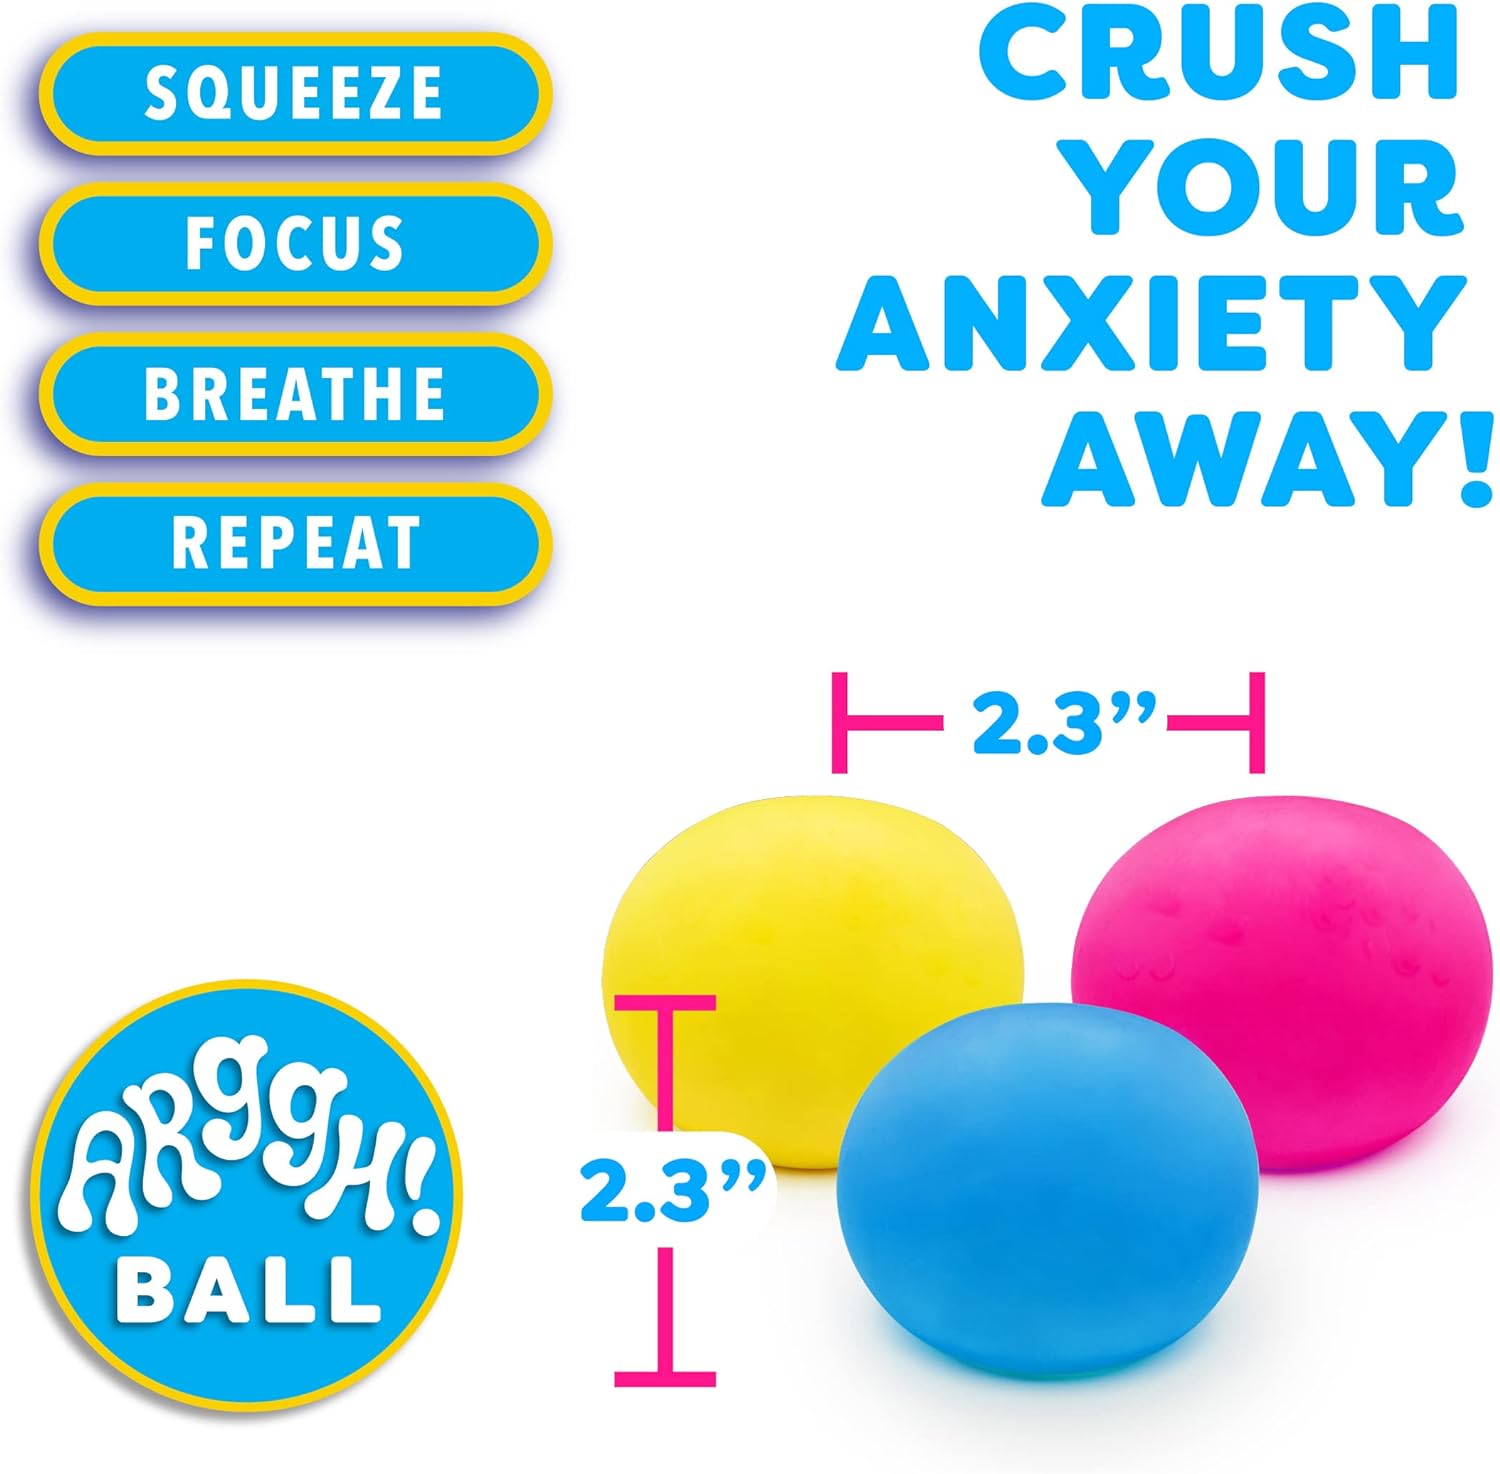 Power Your Fun Arggh Mini Stress Balls for Adults and Kids - 3pk Squishy Stress Balls, Color Changing Resistance Fidget Toys Sensory Stress Anxiety Relief Squeeze Toys Squishy Toy (Yellow, Pink, Blue)